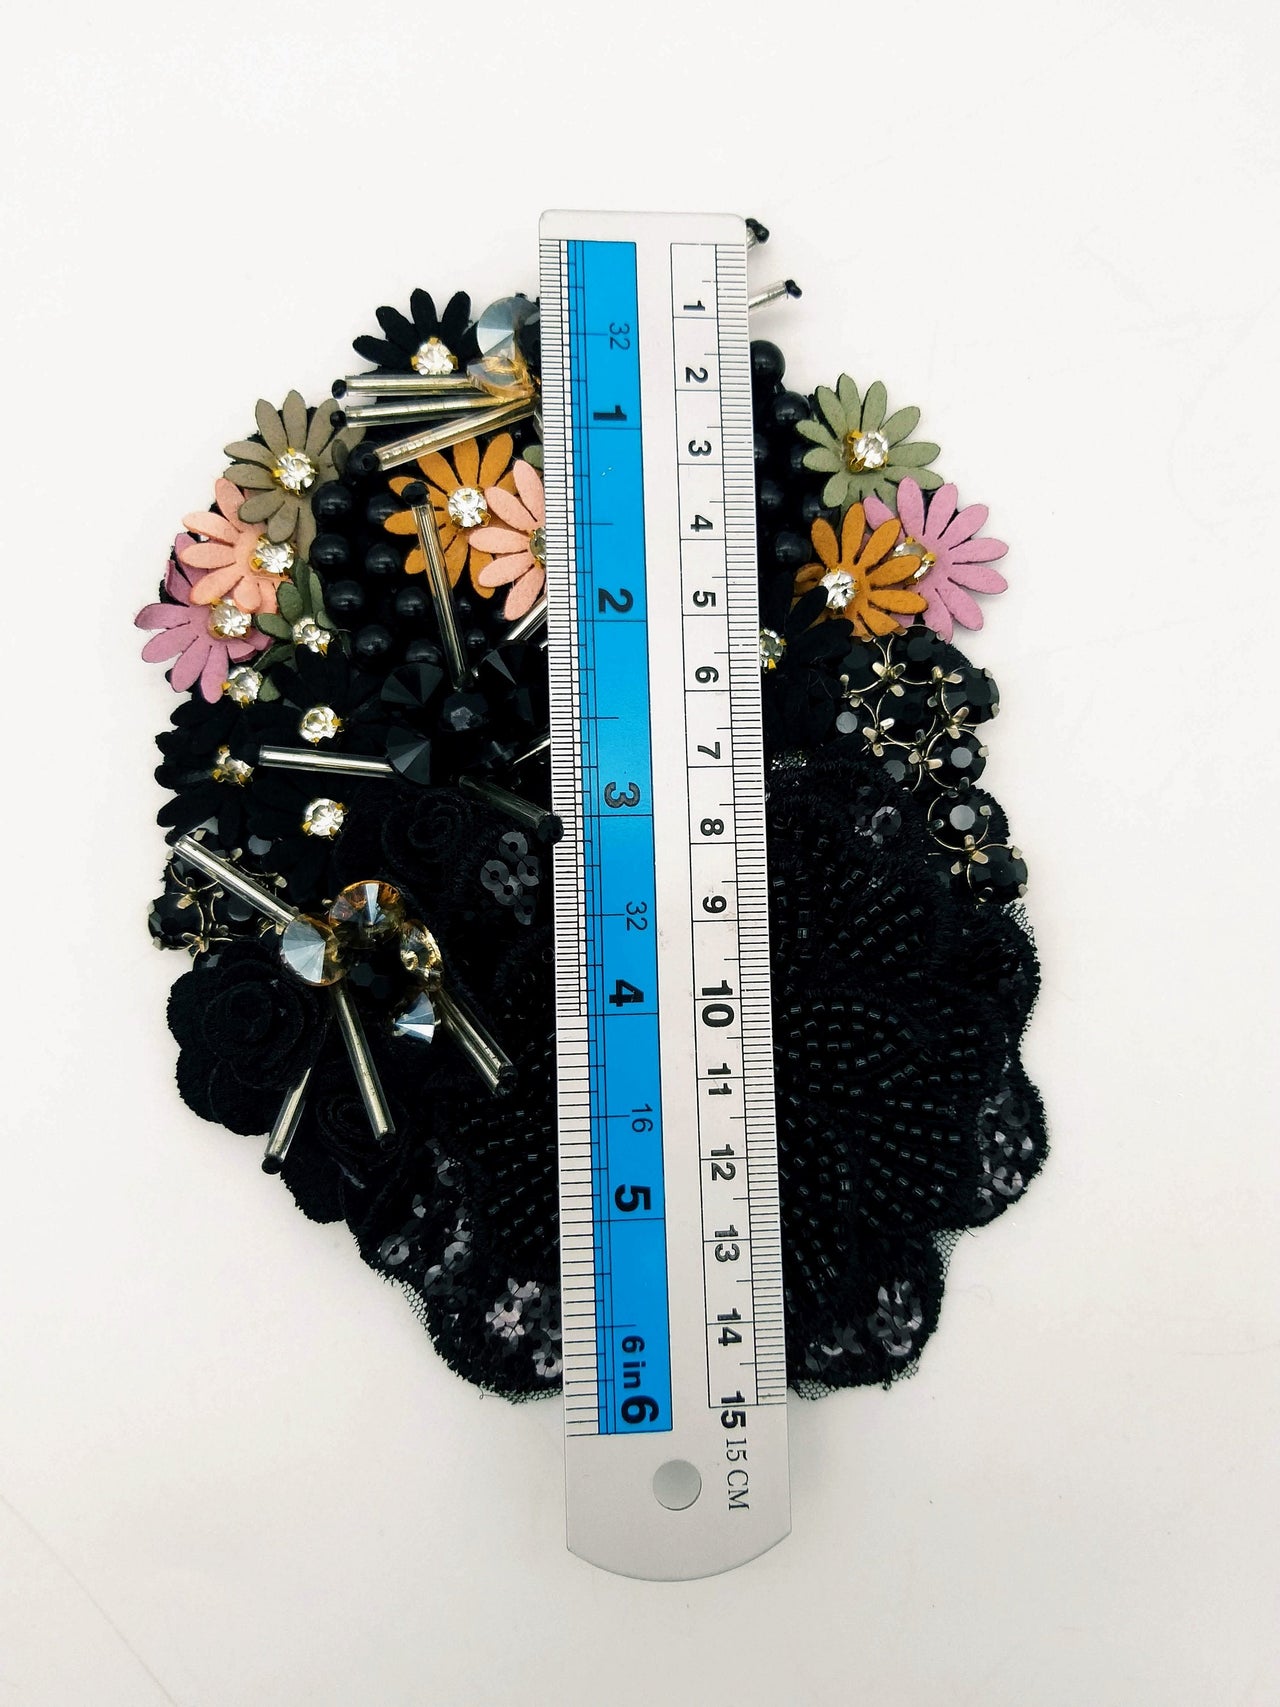 Black Hand Embroidered Floral Applique With Beads, Rhinestones,Bugle Beads